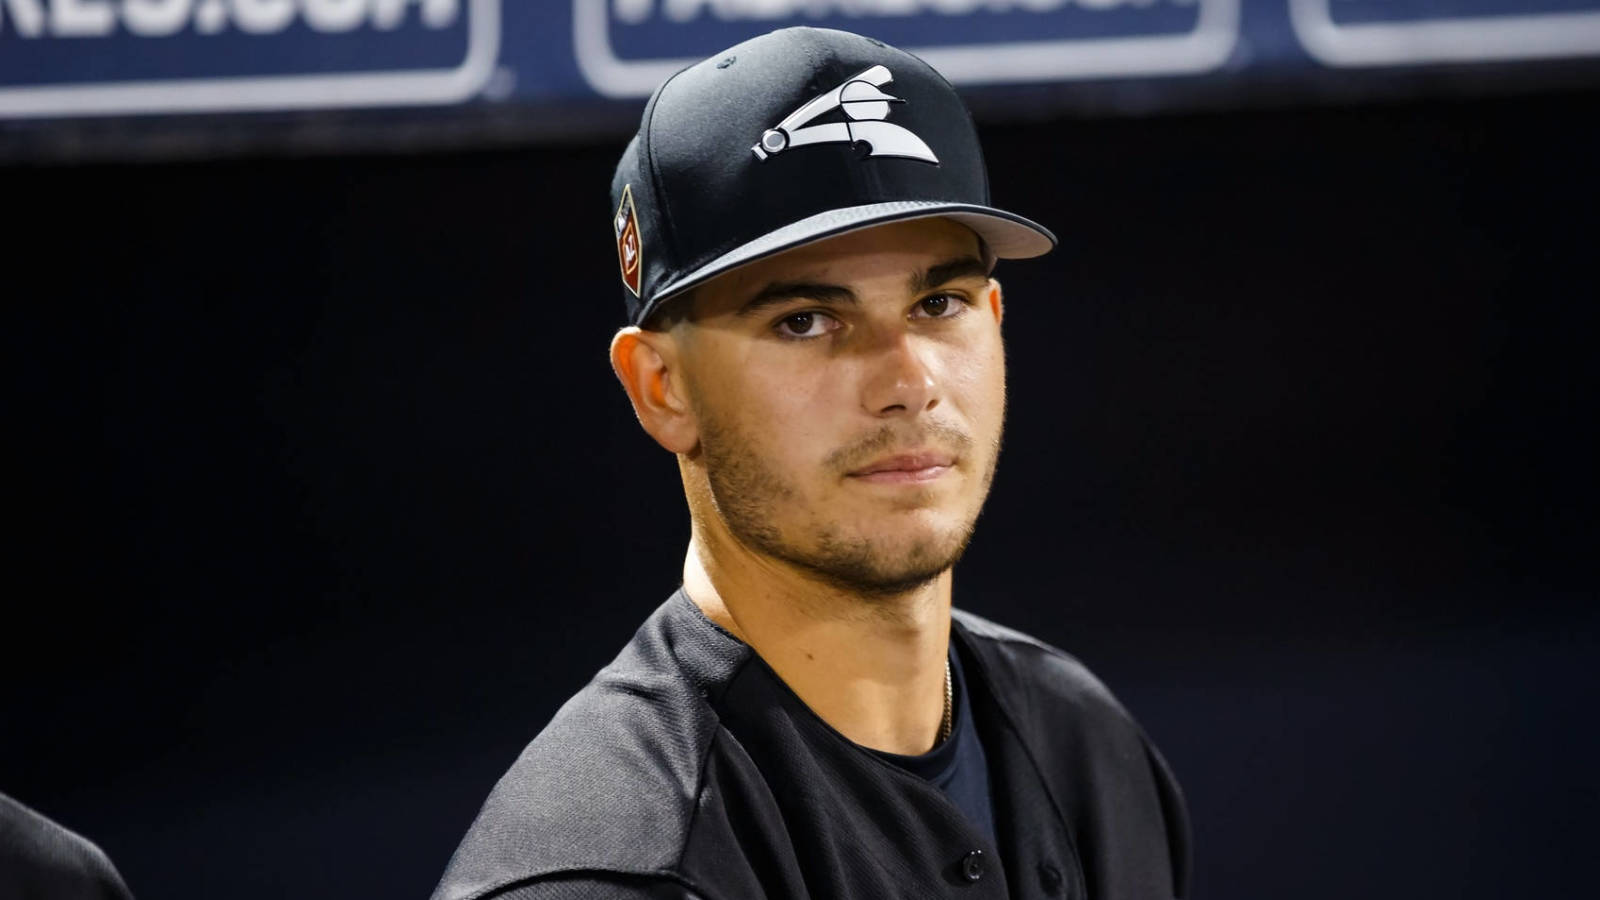 dylan cease funny